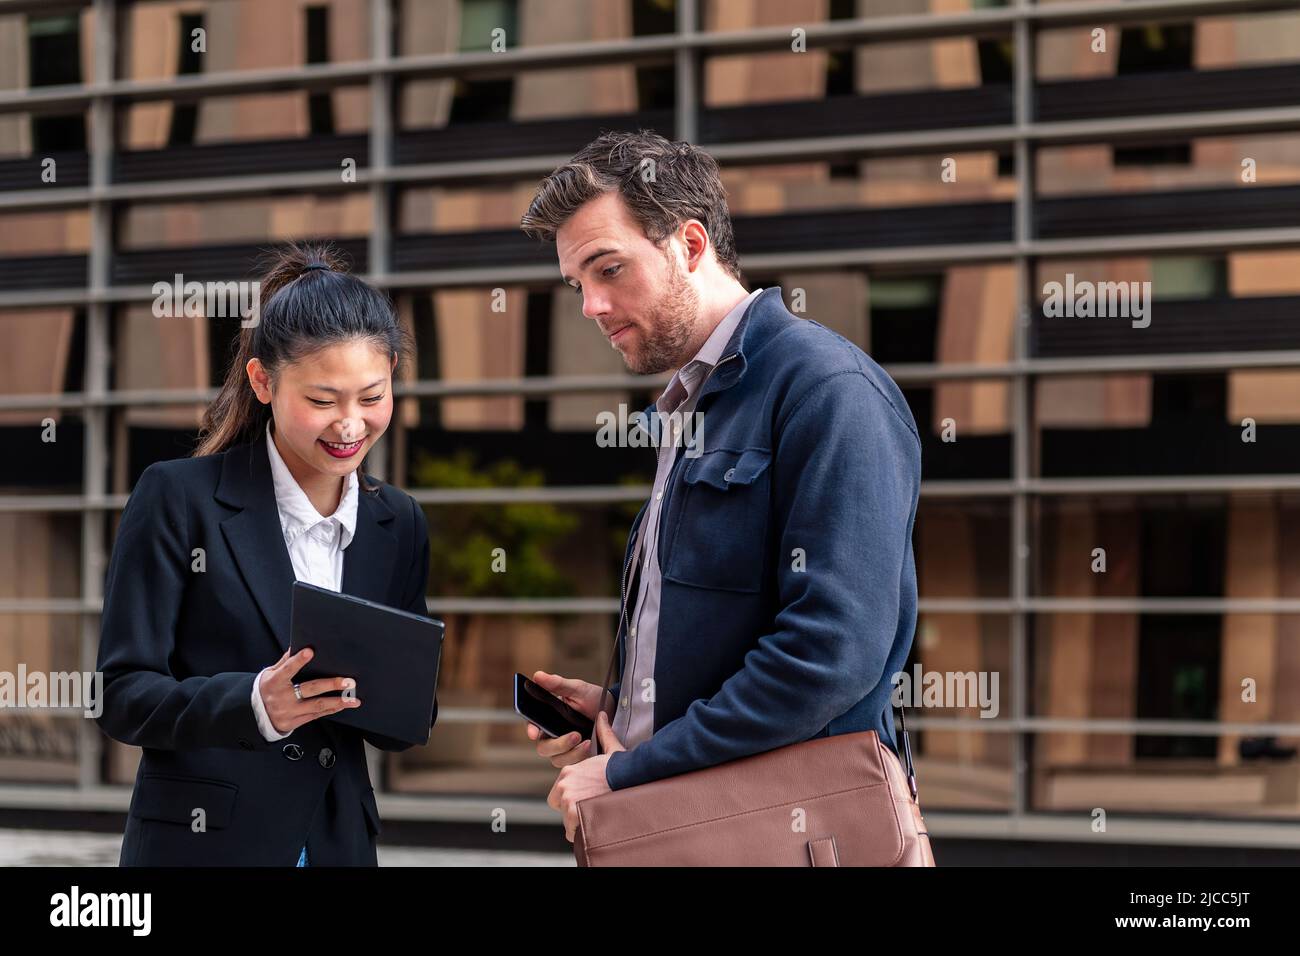 young businesswoman shows tablet to a businessman Stock Photo